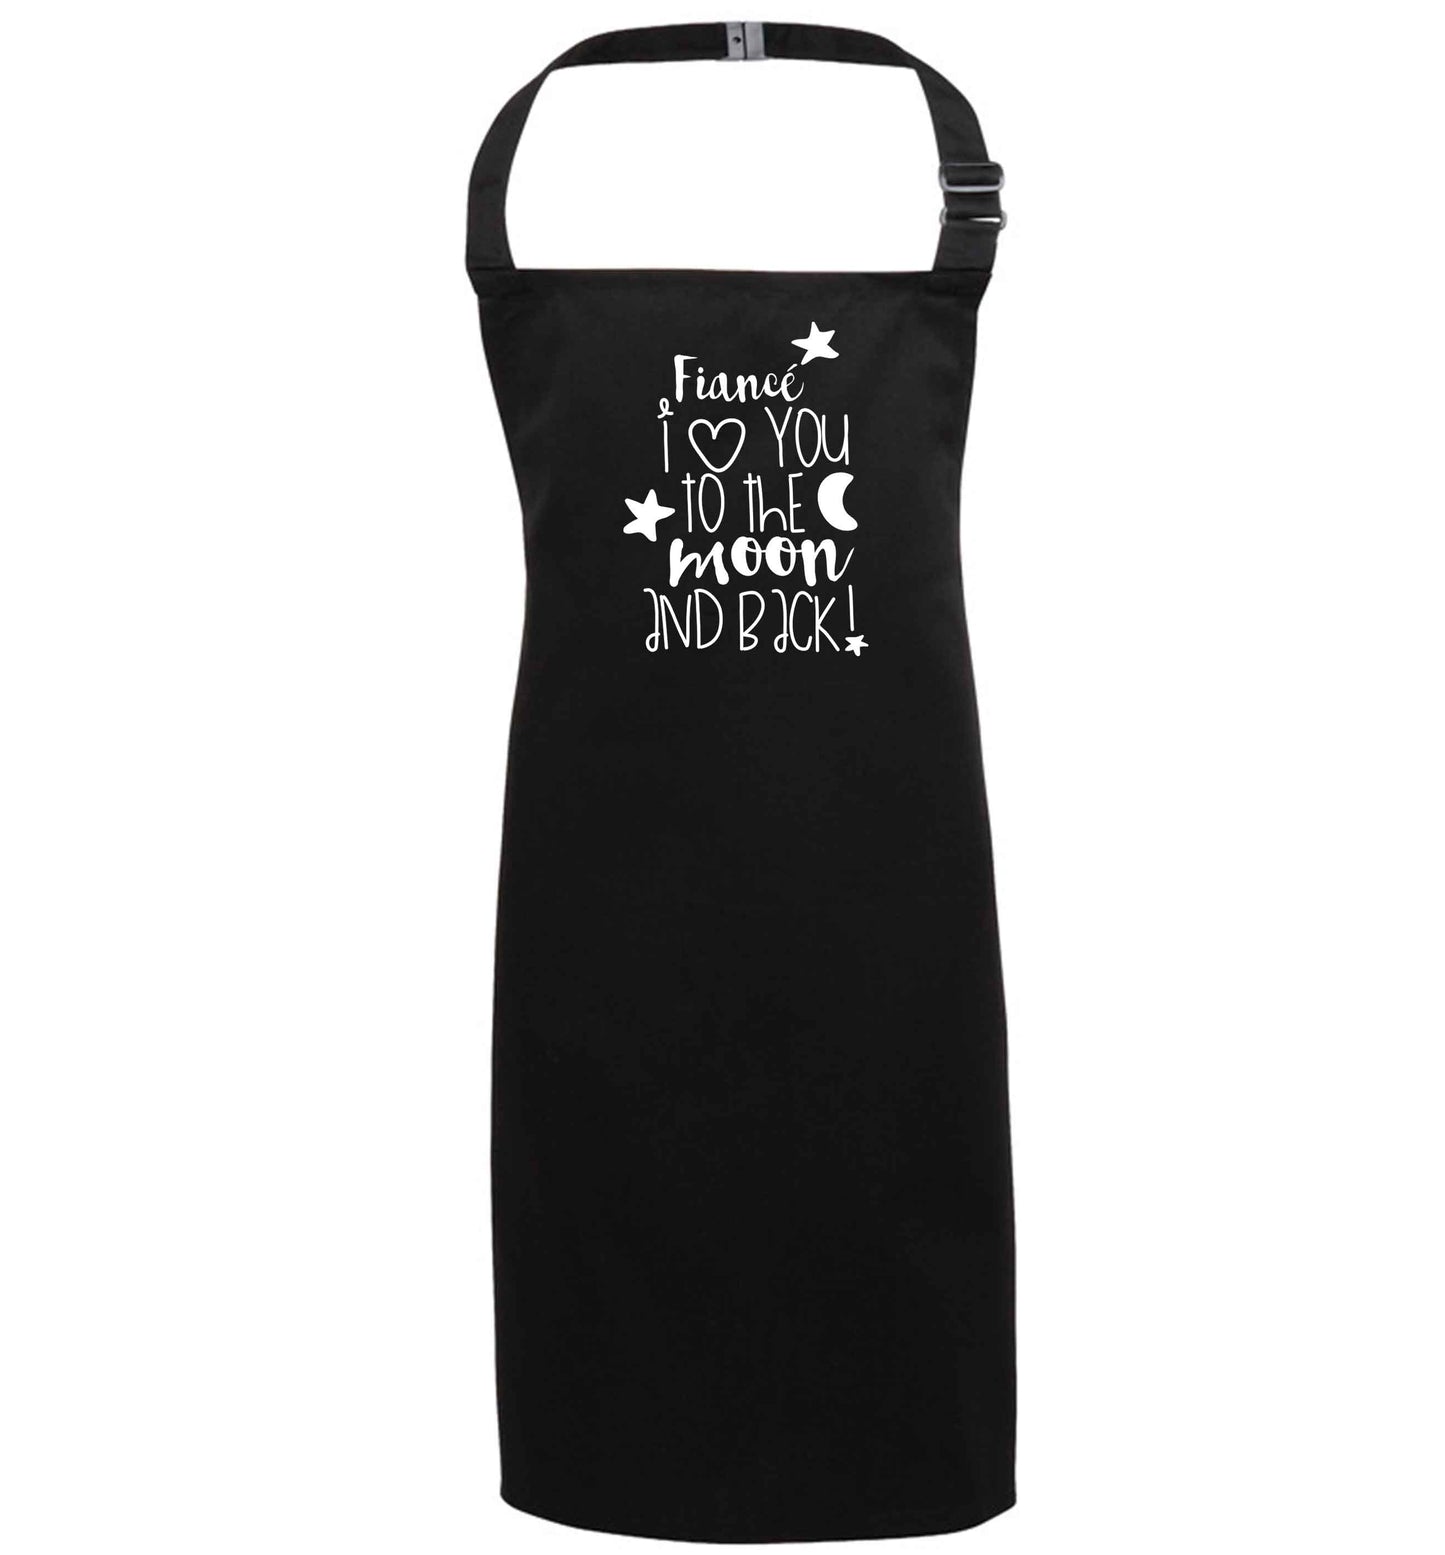 Fiancé I love you to the moon and back black apron 7-10 years